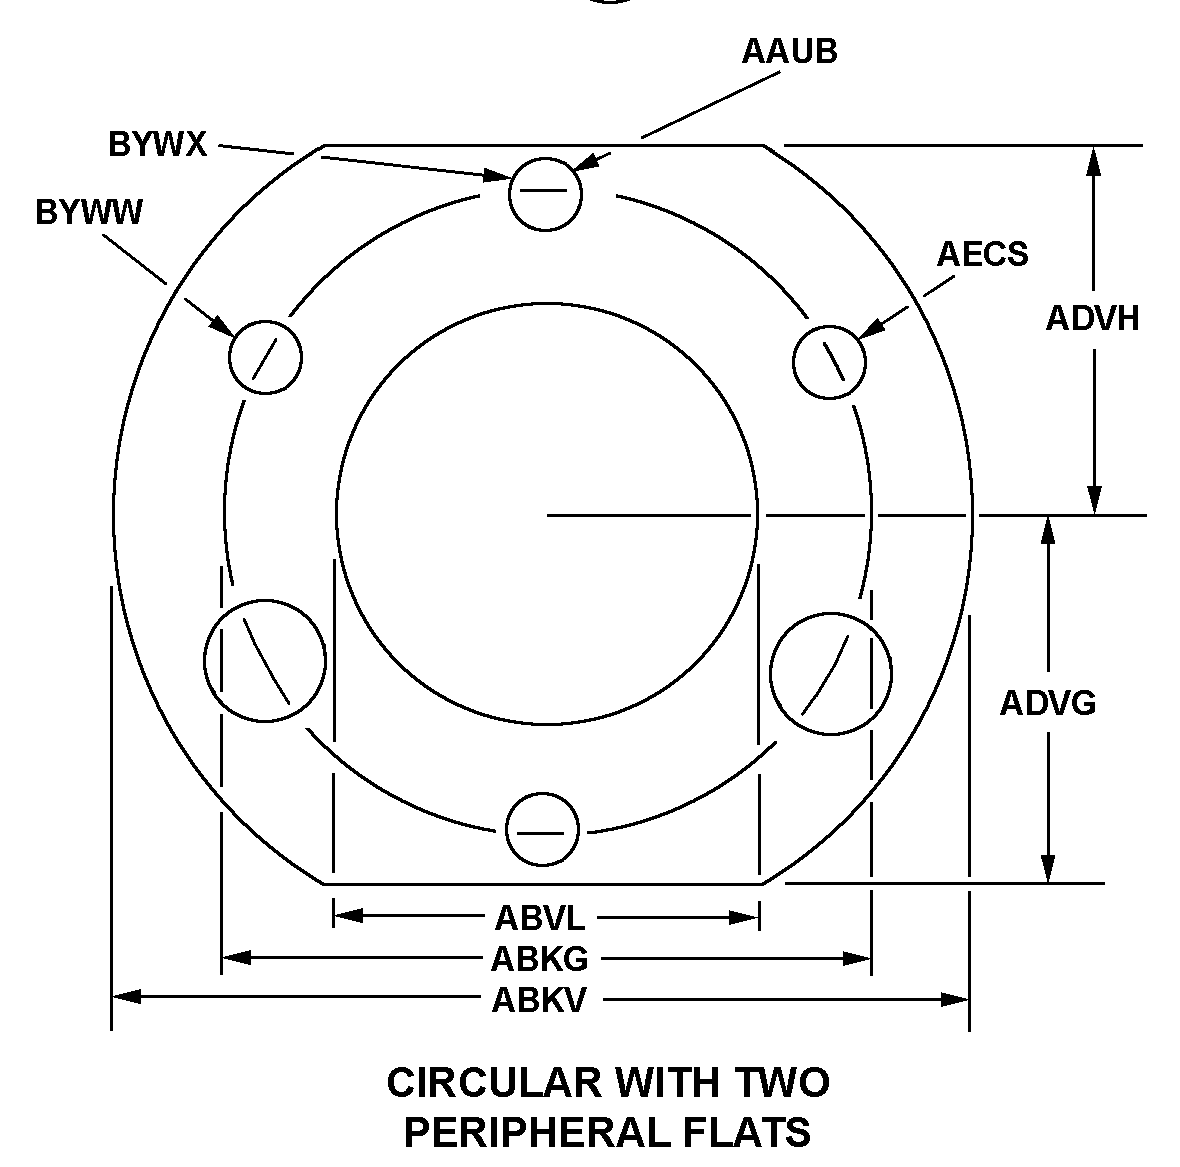 CIRCULAR WITH TWO PERIPHERAL FLATS style nsn 5330-01-292-5385